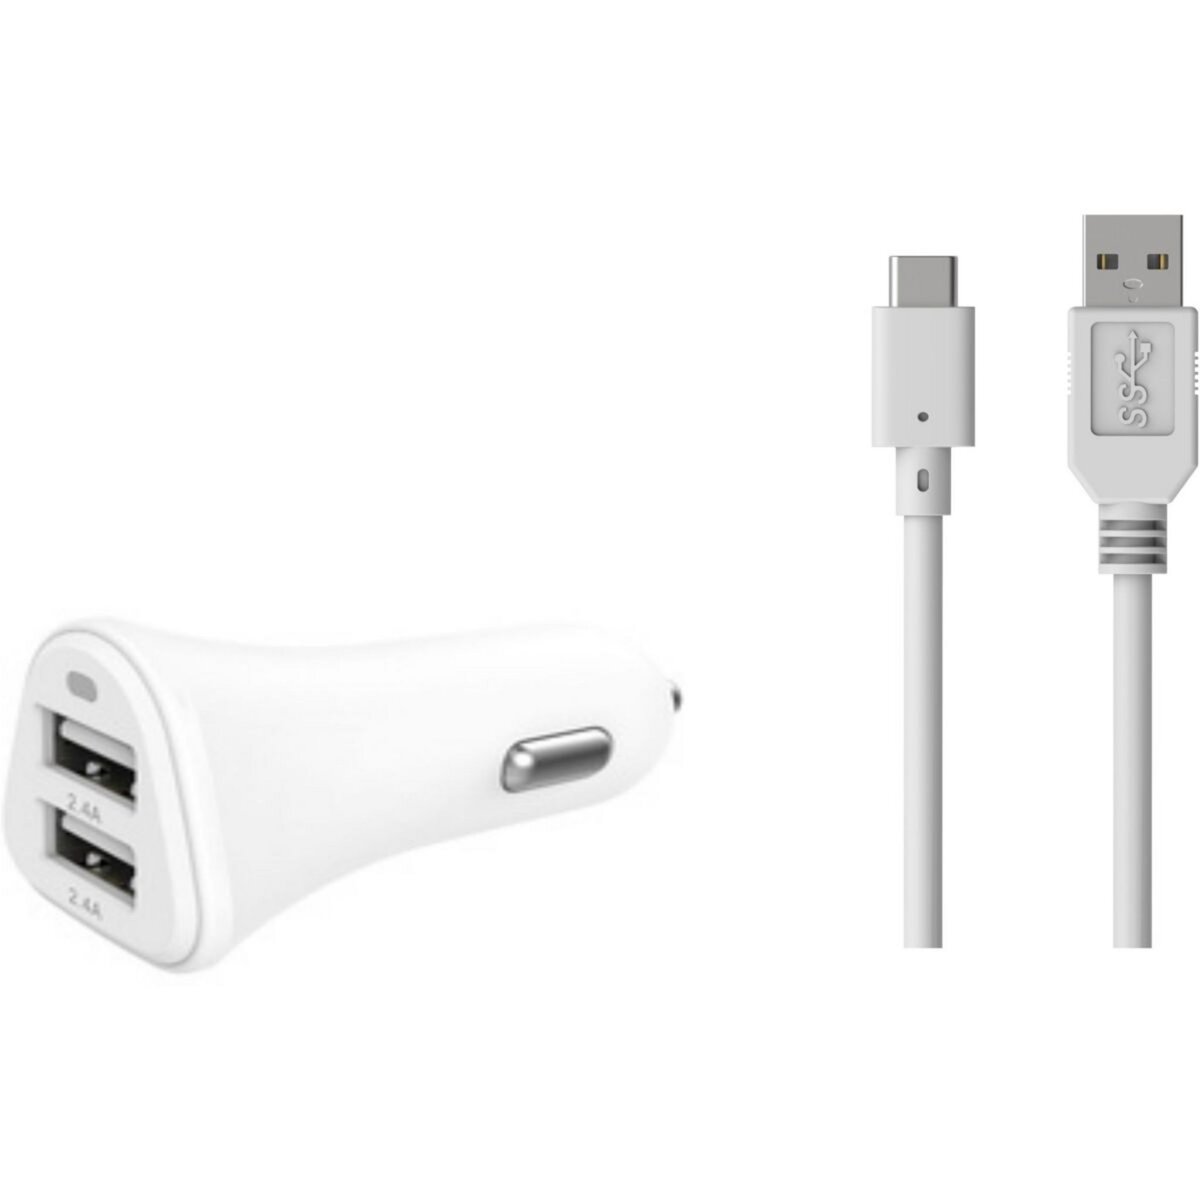 ESSENTIEL B Chargeur allume-cigare 2 USB 2.4A + Cable USB C Blanc